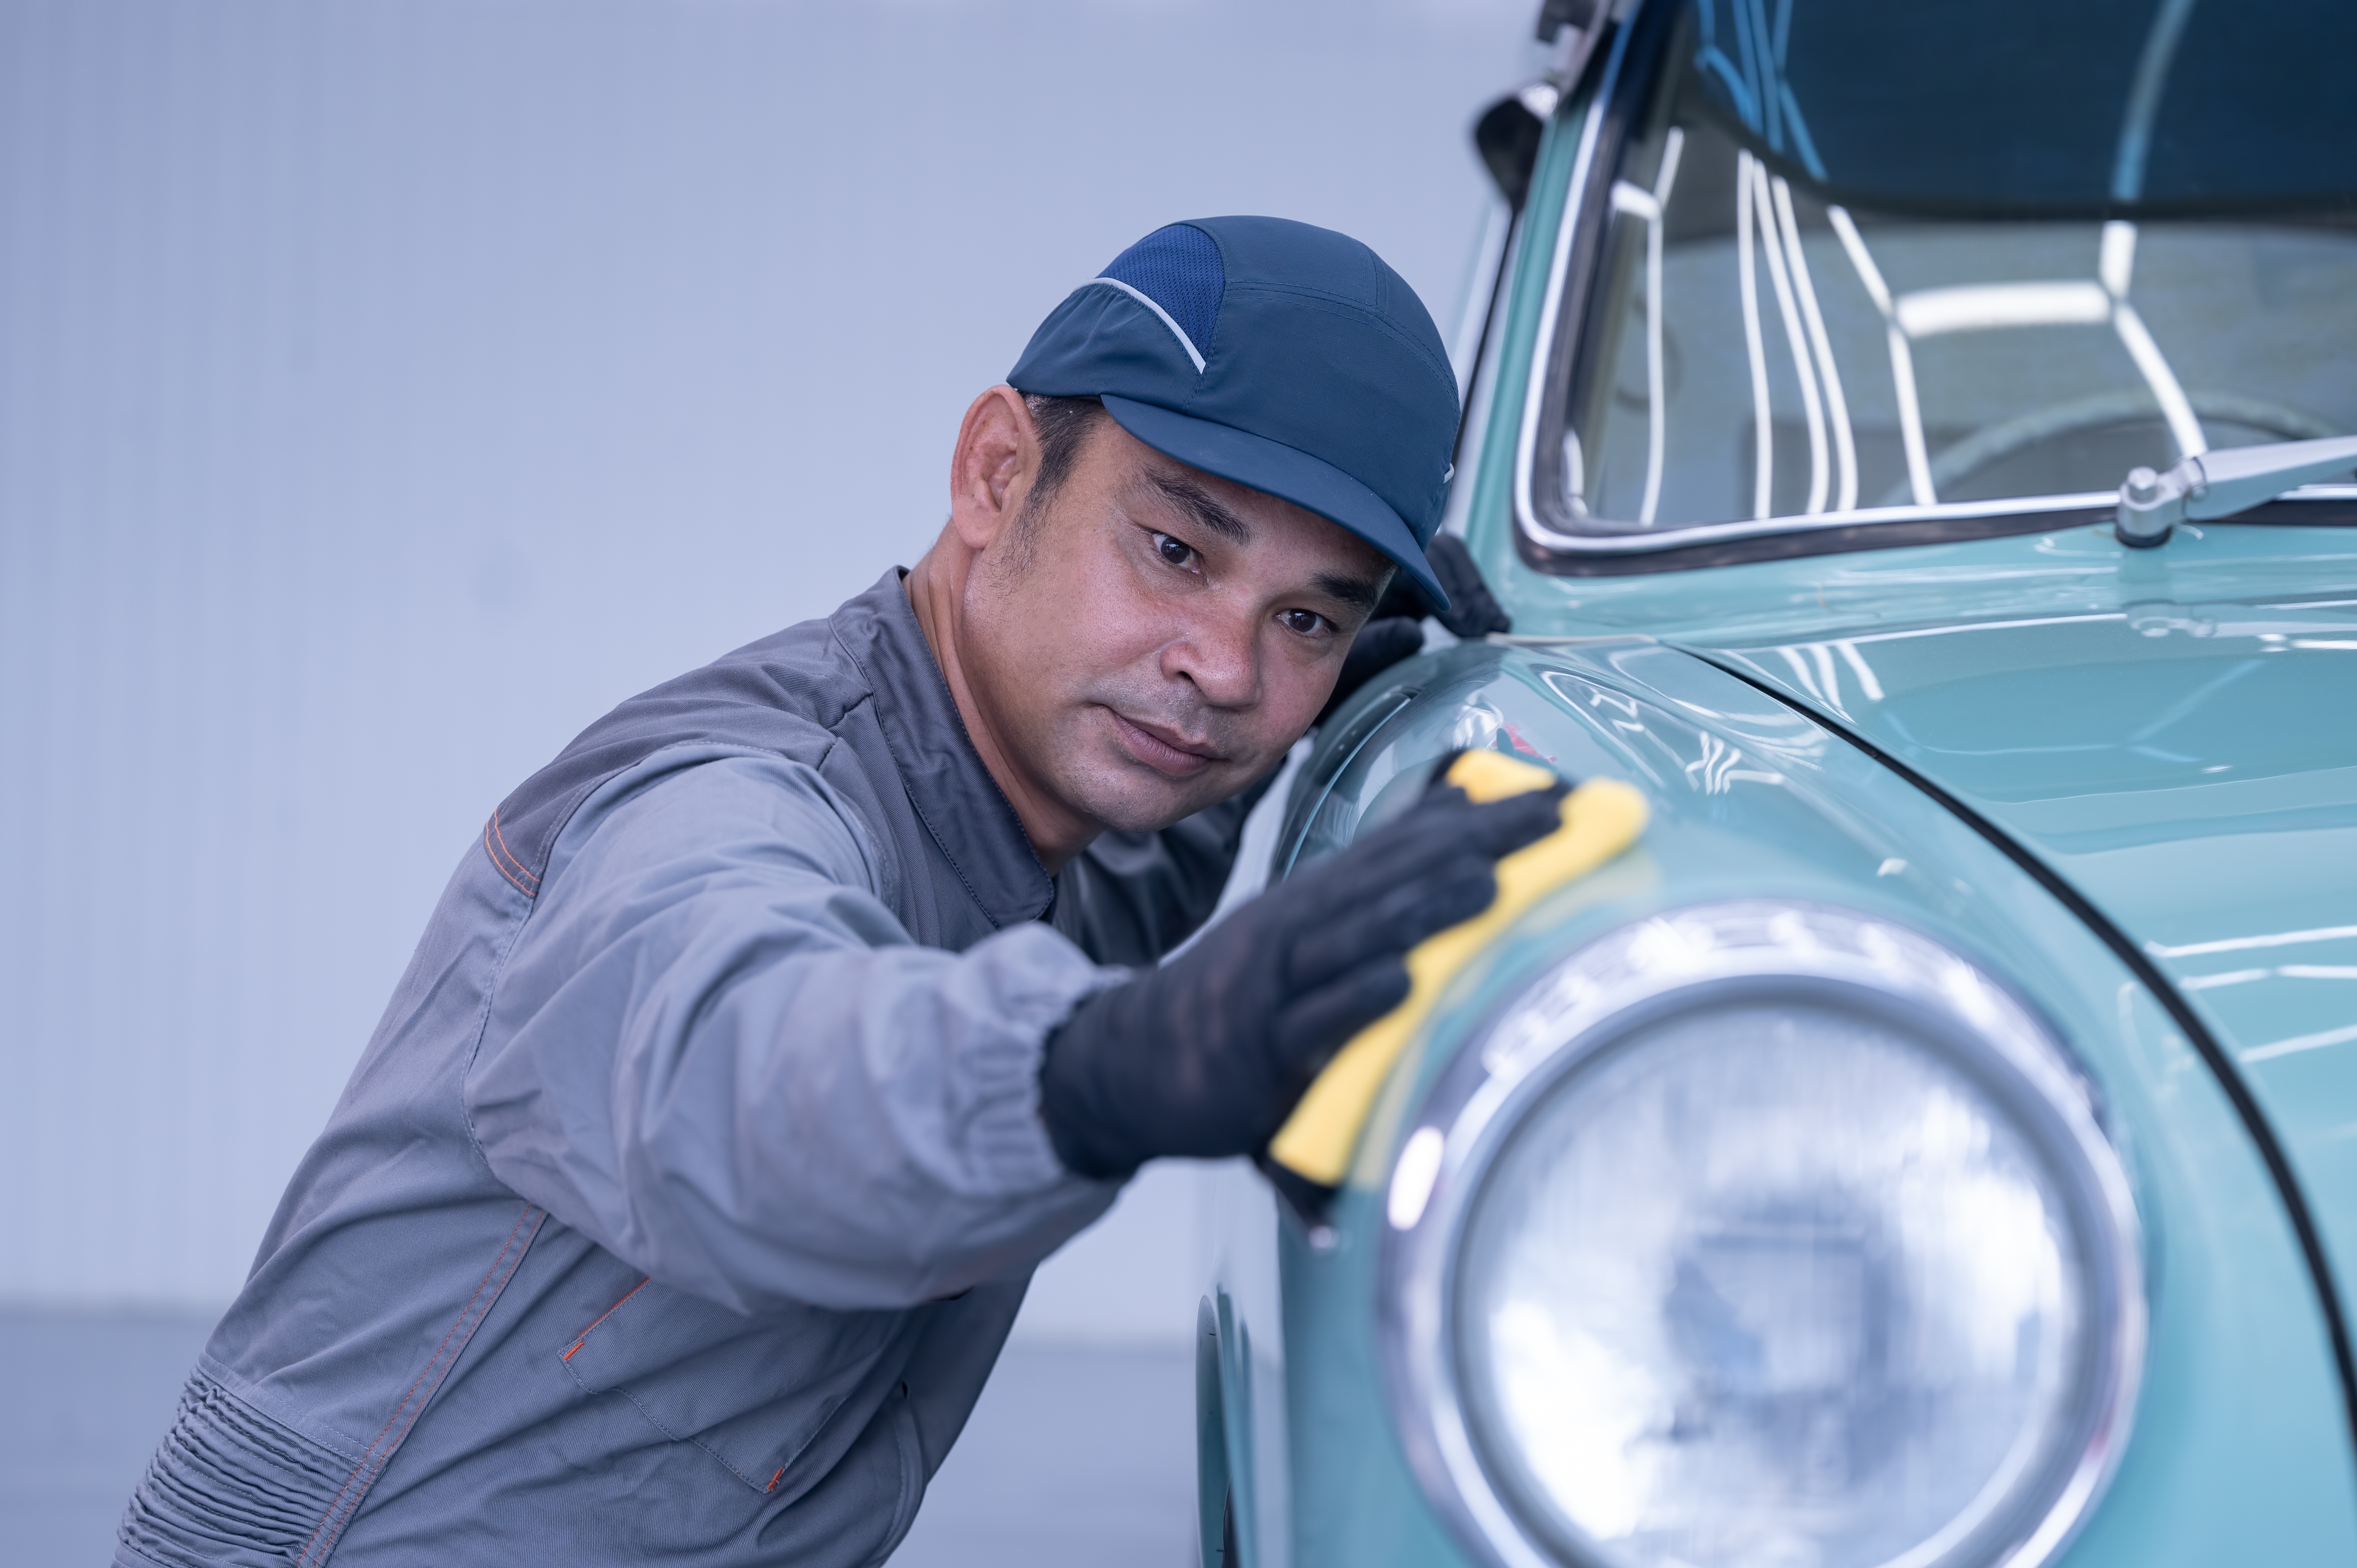 While many classic car maintenance tasks can be done by enthusiasts, some jobs are more specialized, and require the expertise of a vintage car mechanic.